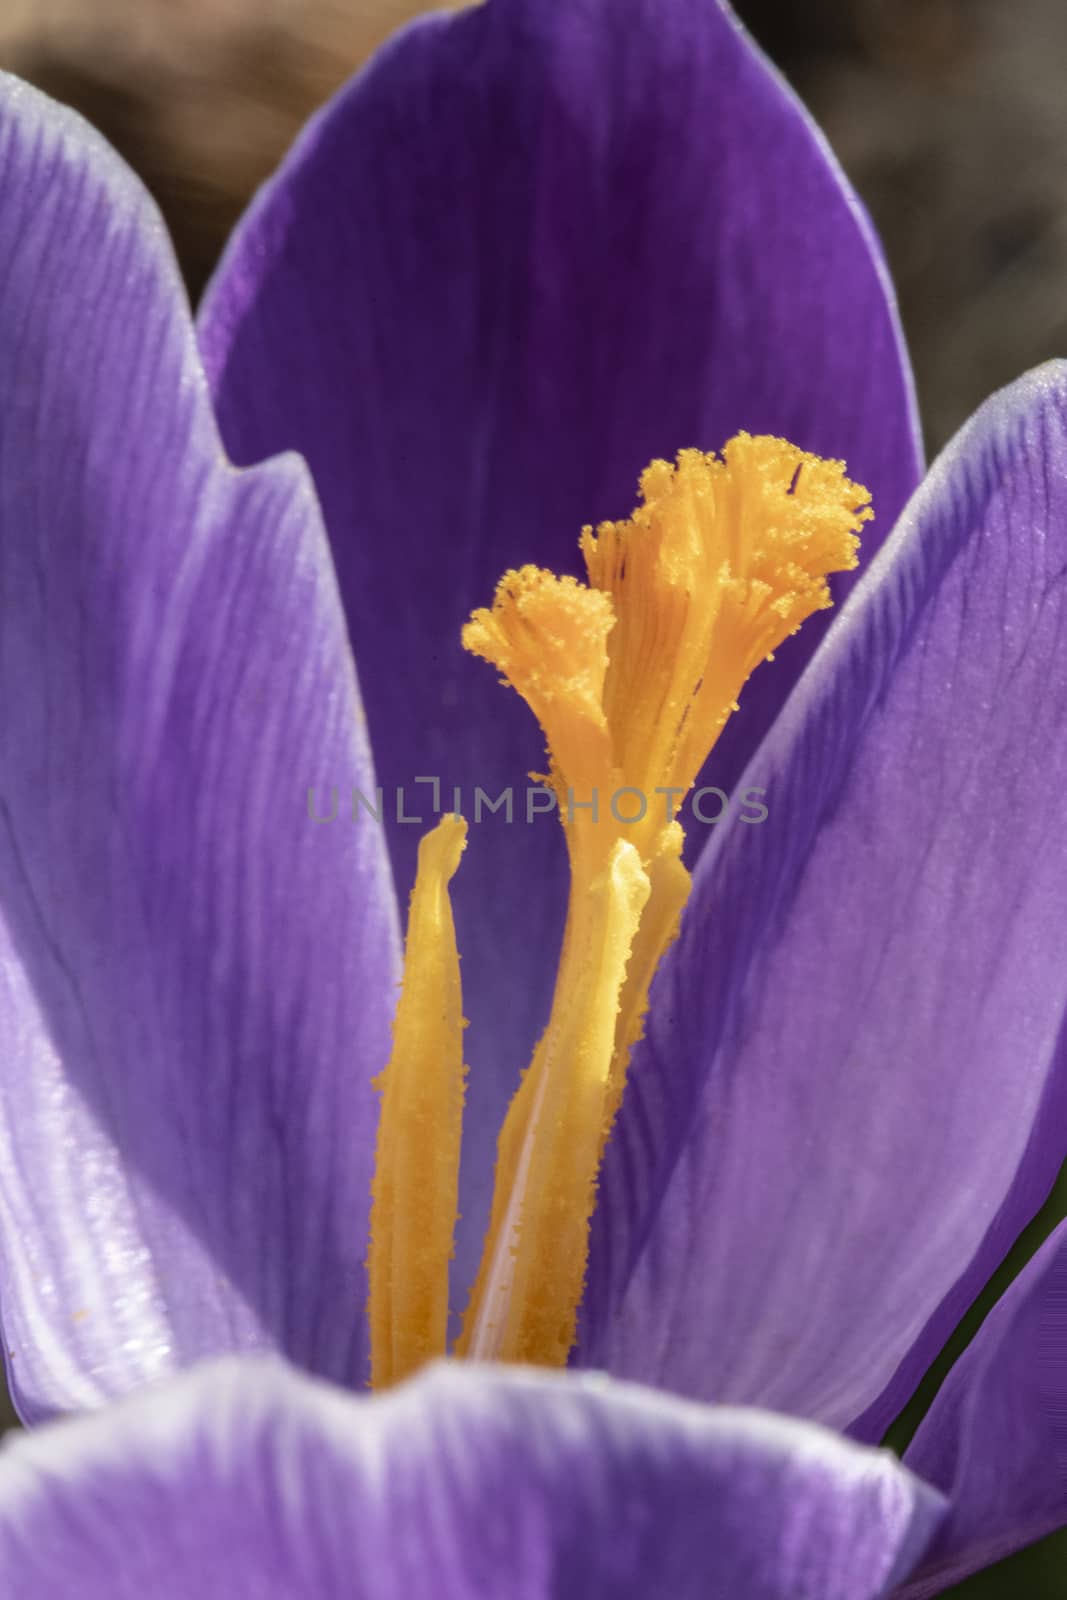 Close up of white purple crocus flower blooming at the early spring against brown dried last year fallen leafs and waiting for bees by ankorlight